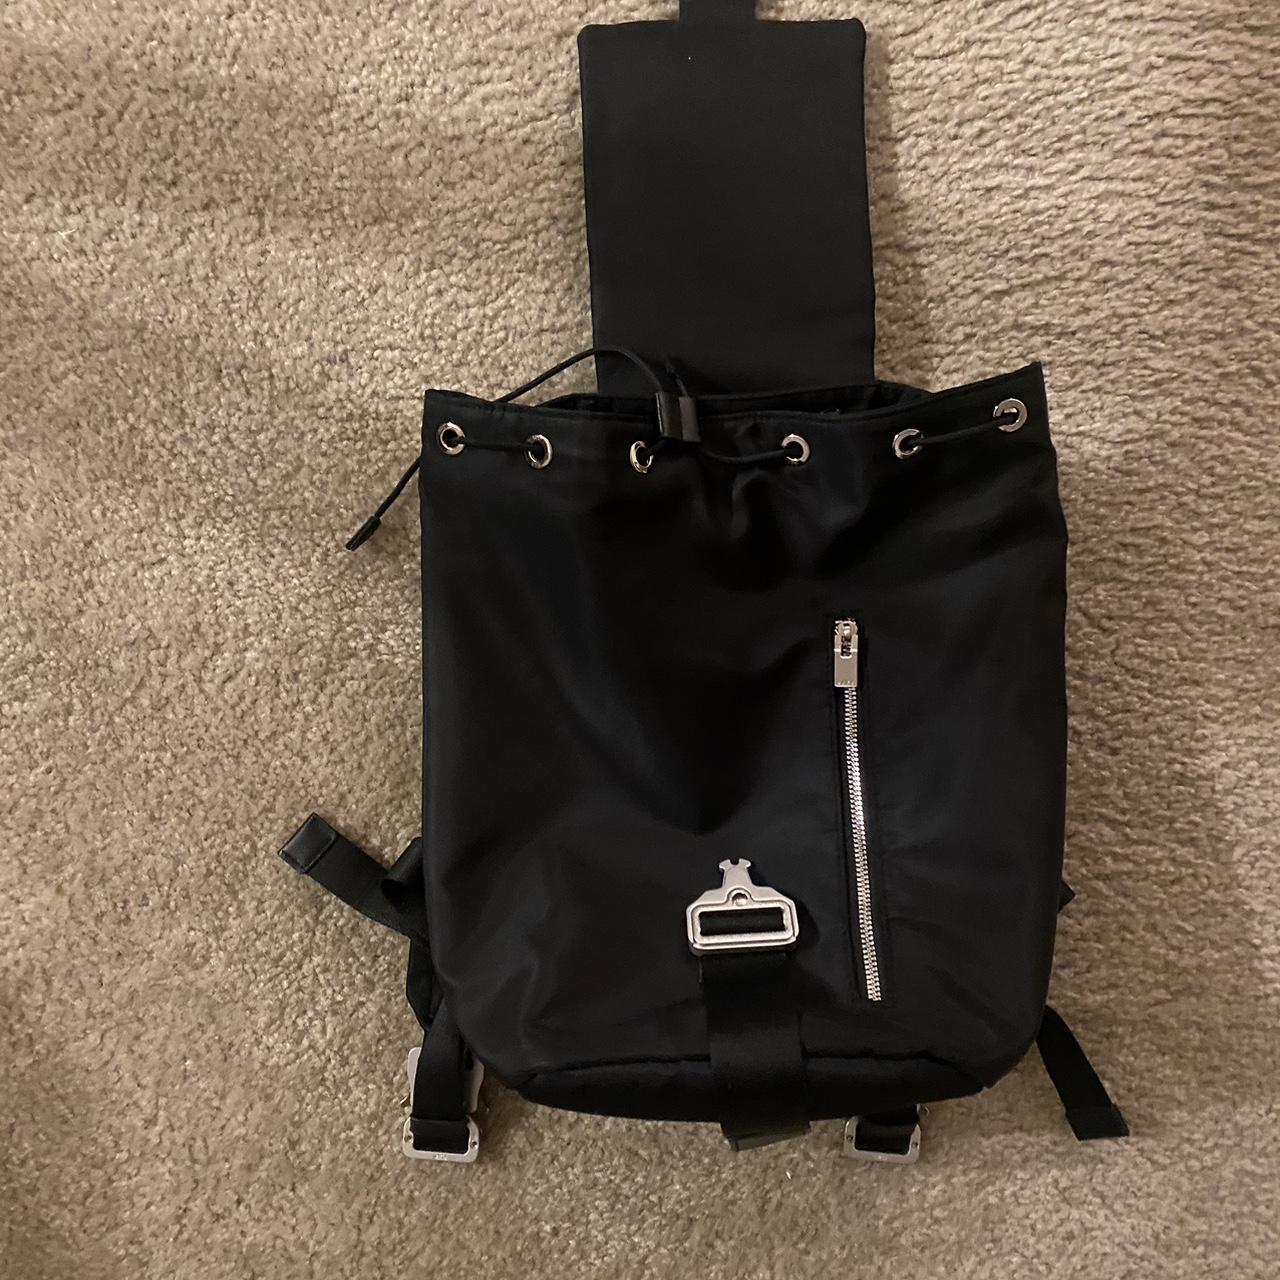 ALYX Silver Reflective Tank Backpack for Sale in Sugar Land, TX